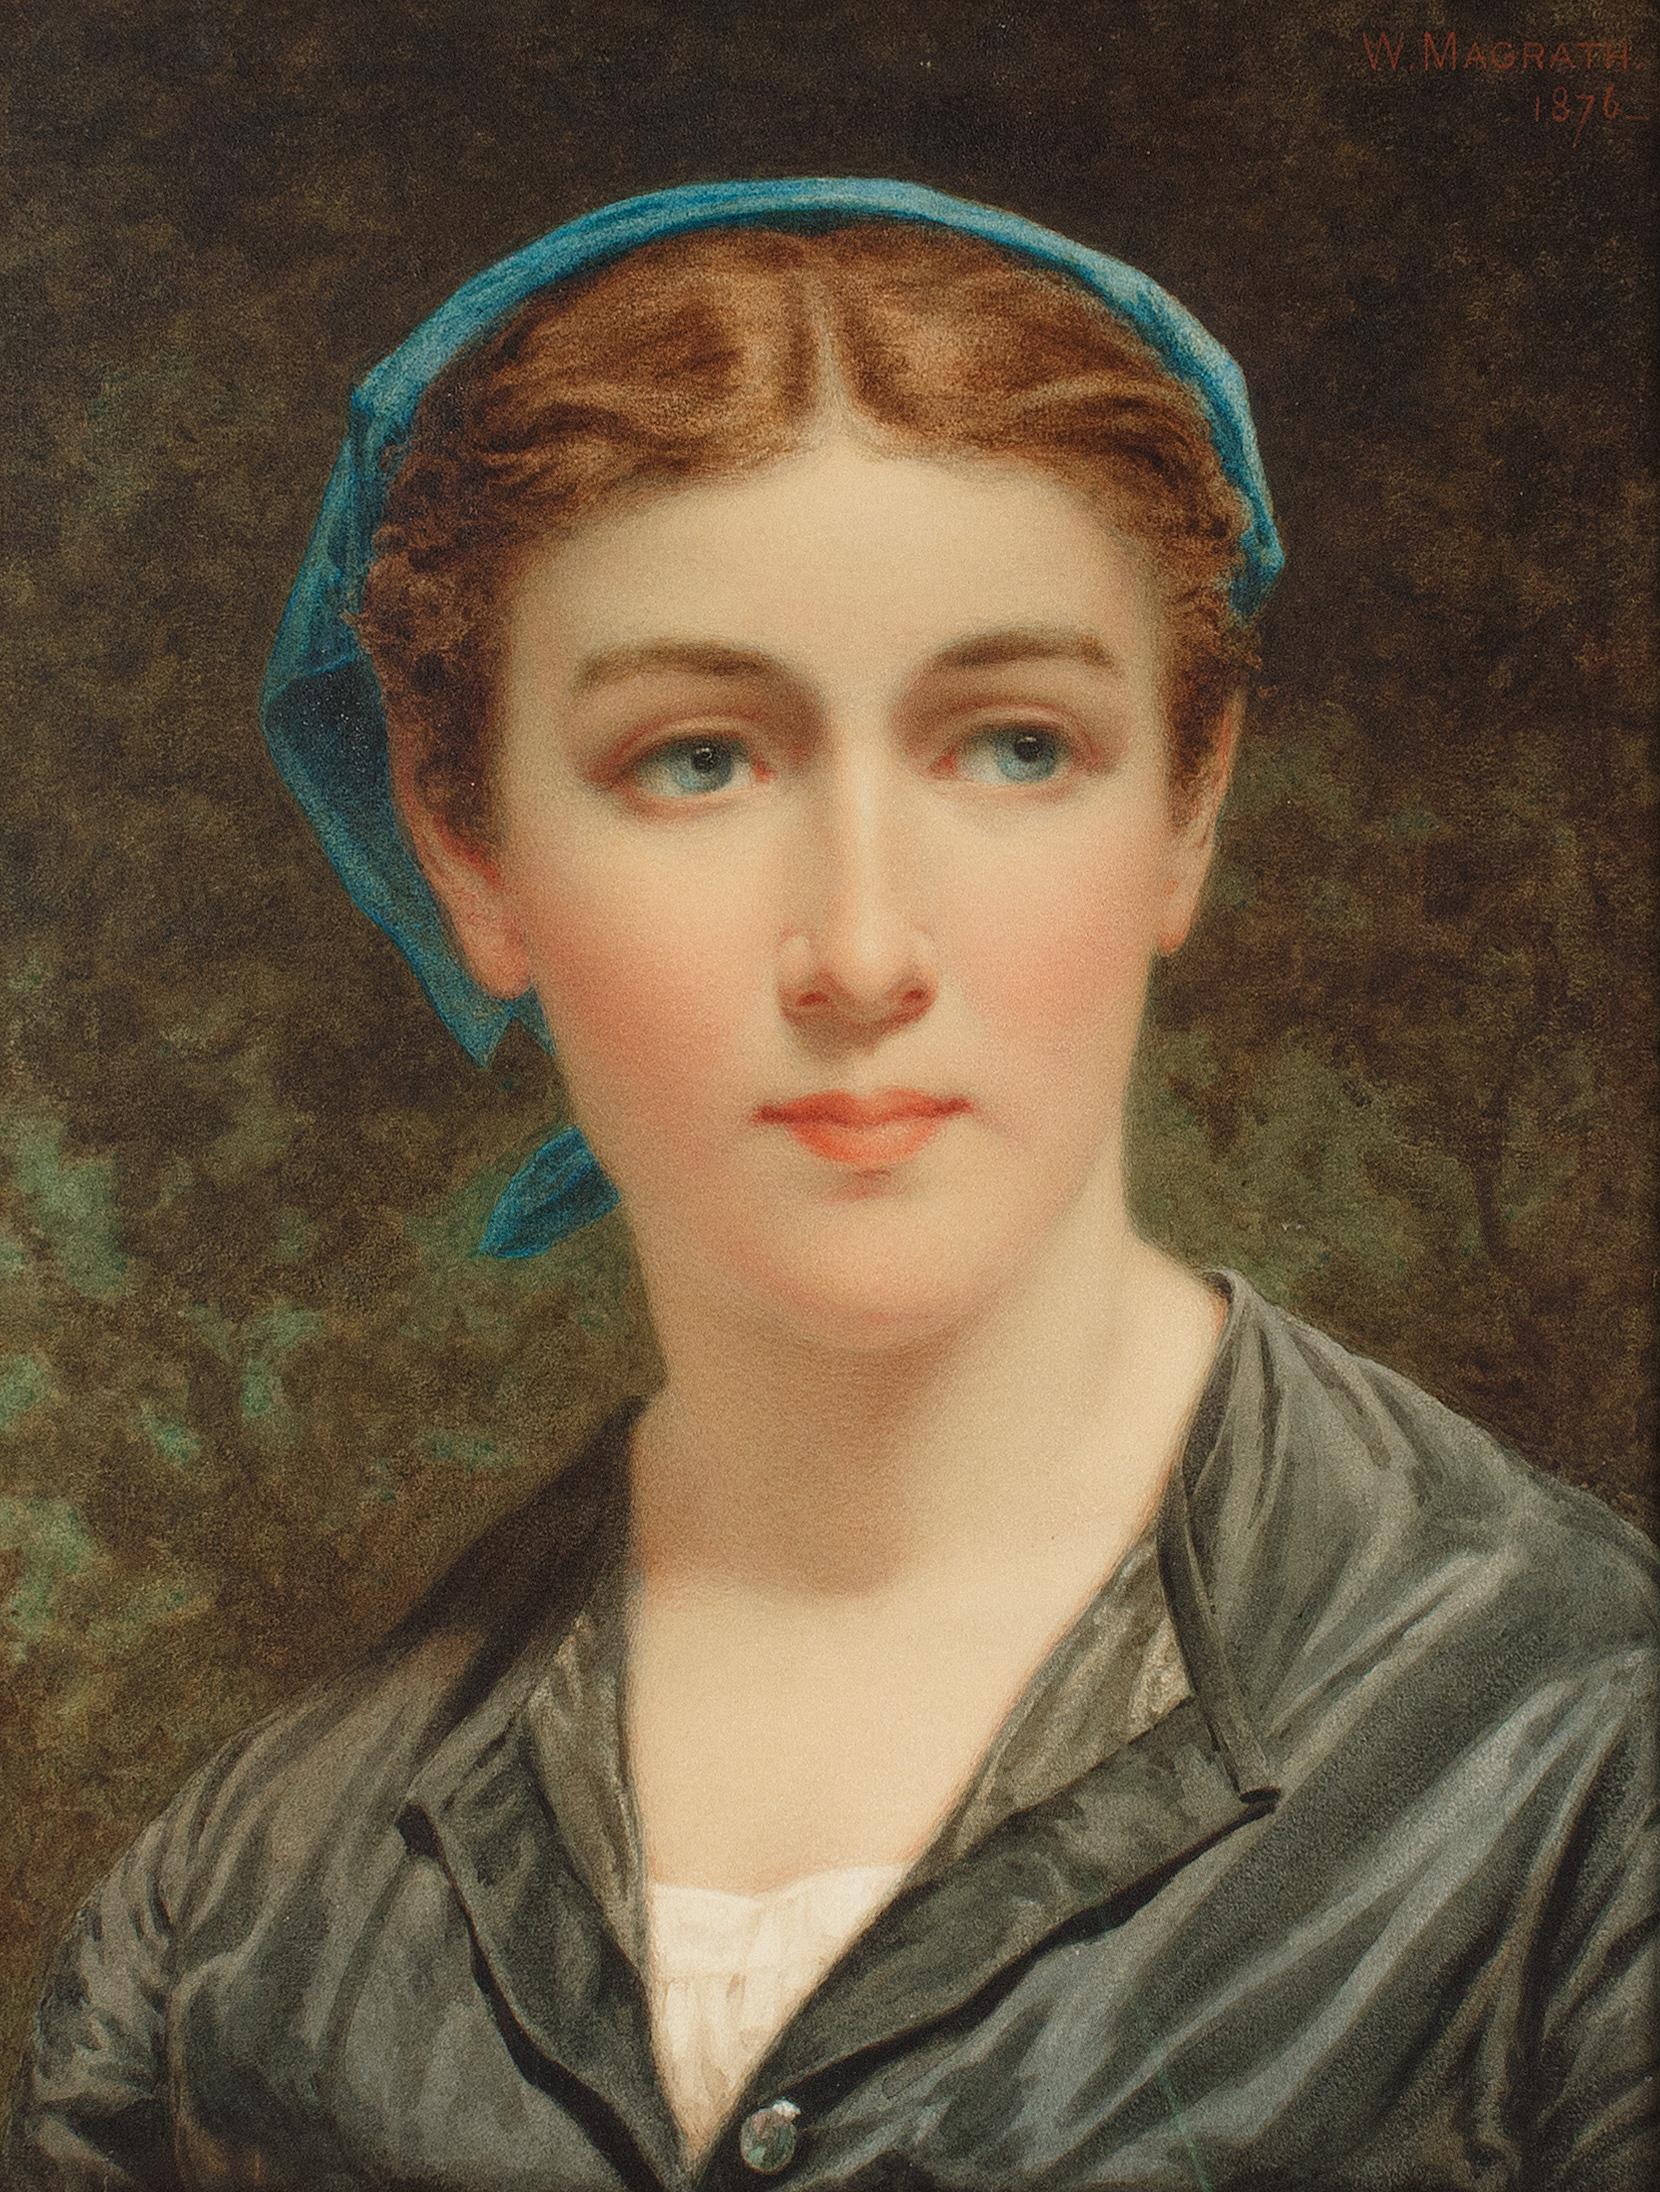 Woman with a Blue Kerchief: watercolor by Irish artist Magrath - Art by William Magrath